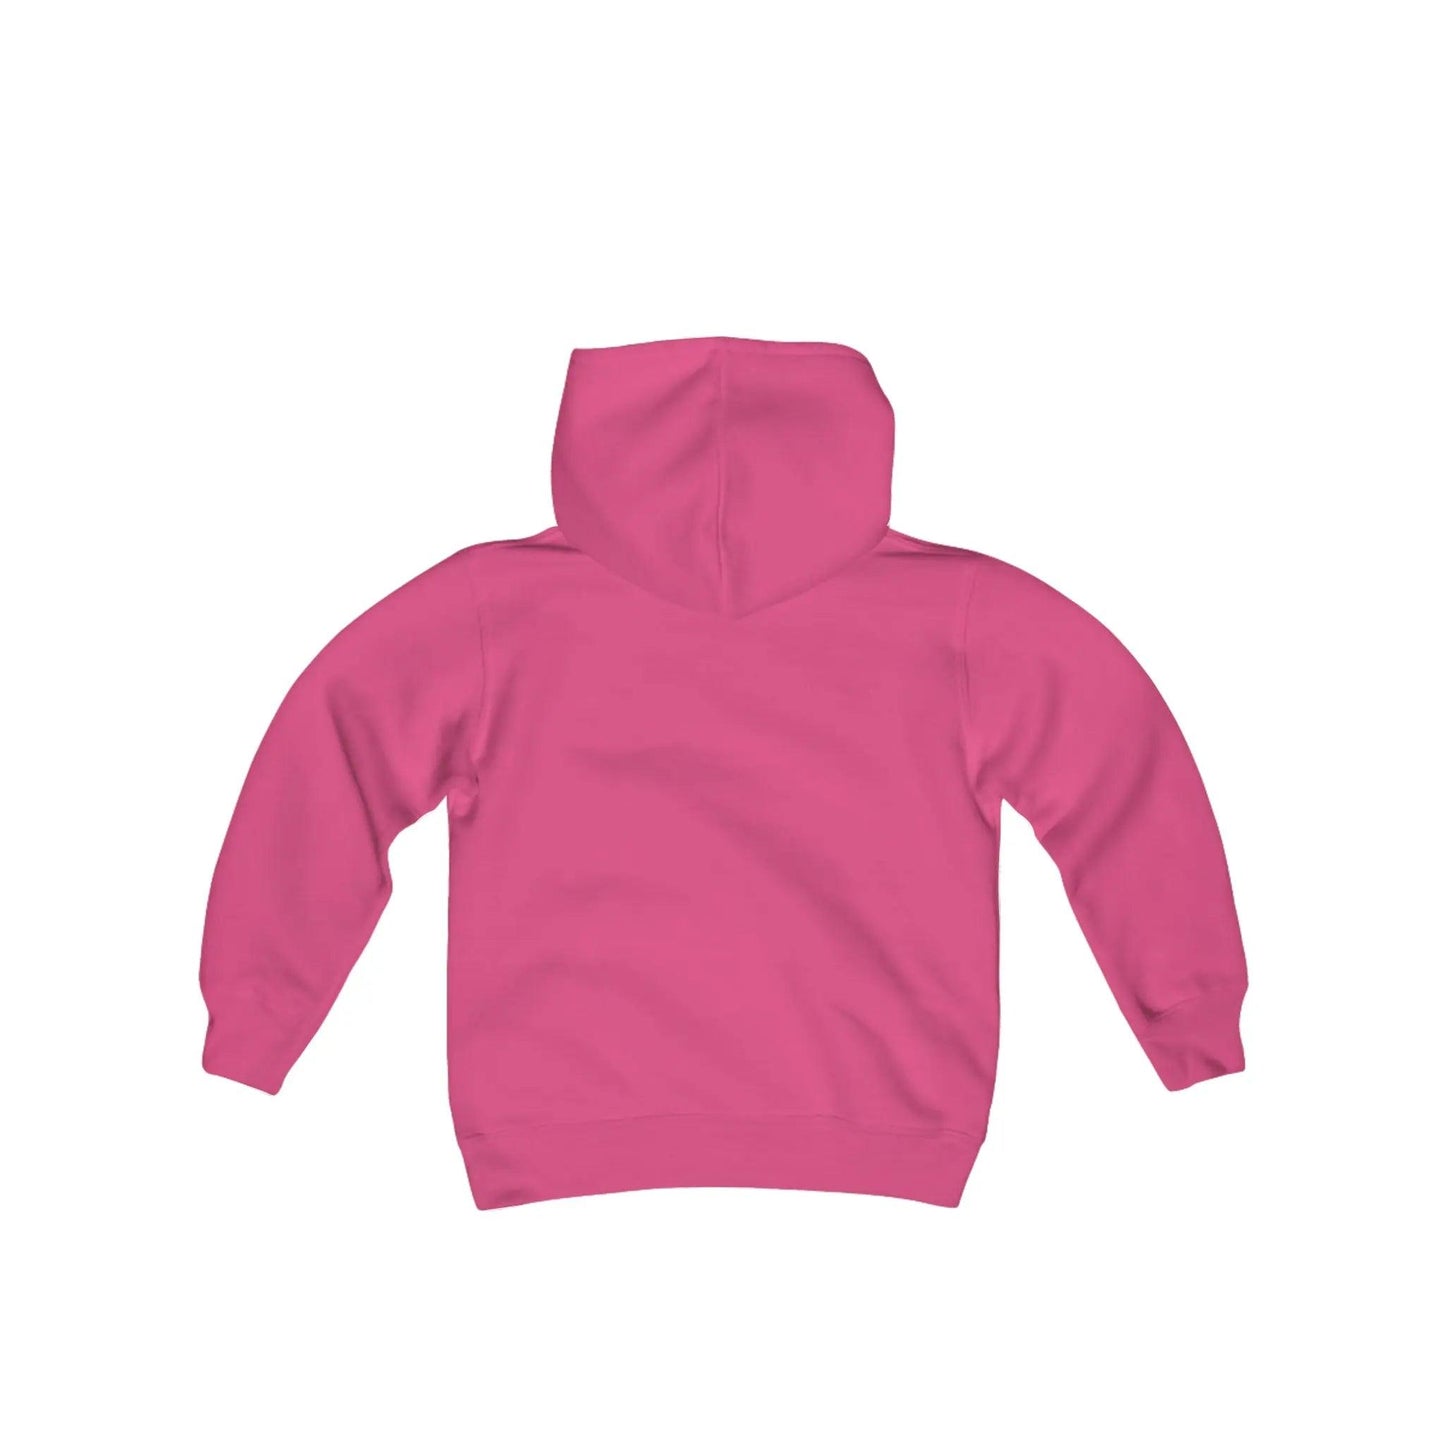 Youth Heavy Blend Hooded Sweatshirt Kids clothes